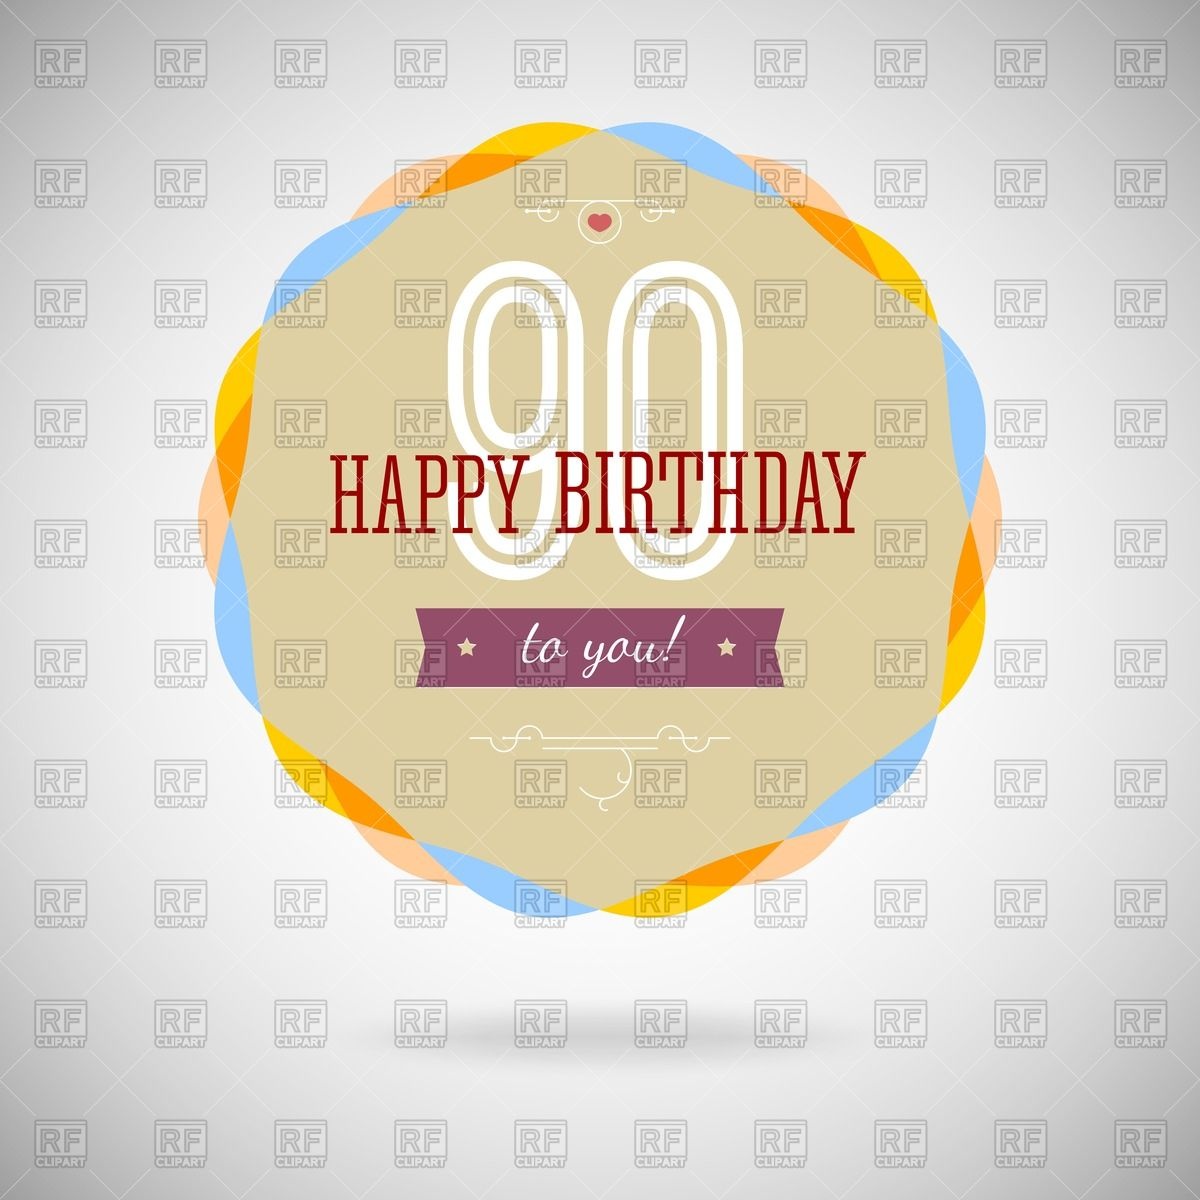 Birthday Greeting Card With Round Frame And Inscription 90 Years    